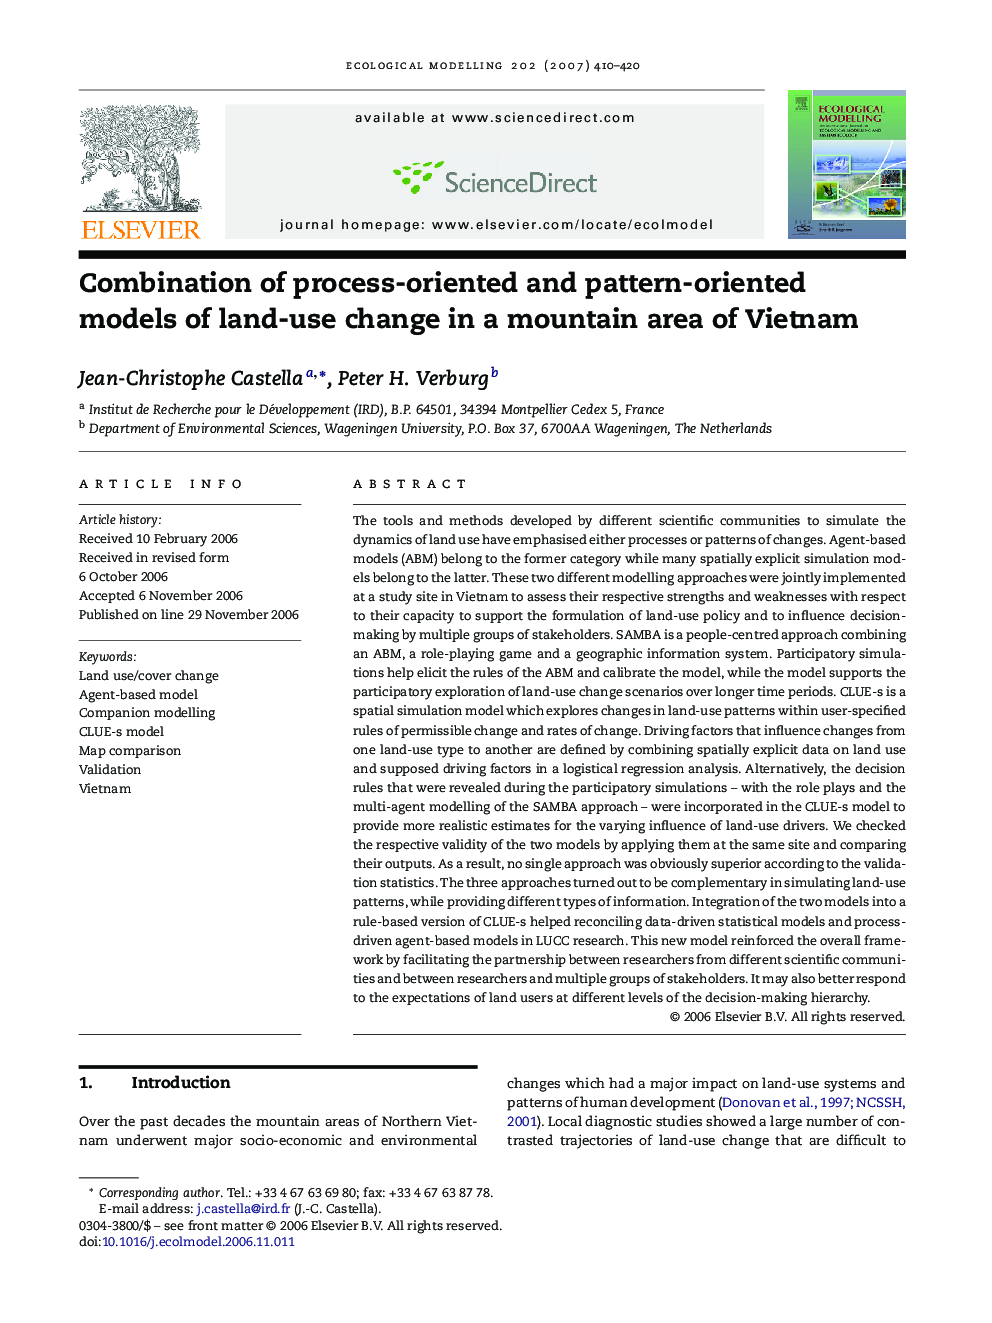 Combination of process-oriented and pattern-oriented models of land-use change in a mountain area of Vietnam